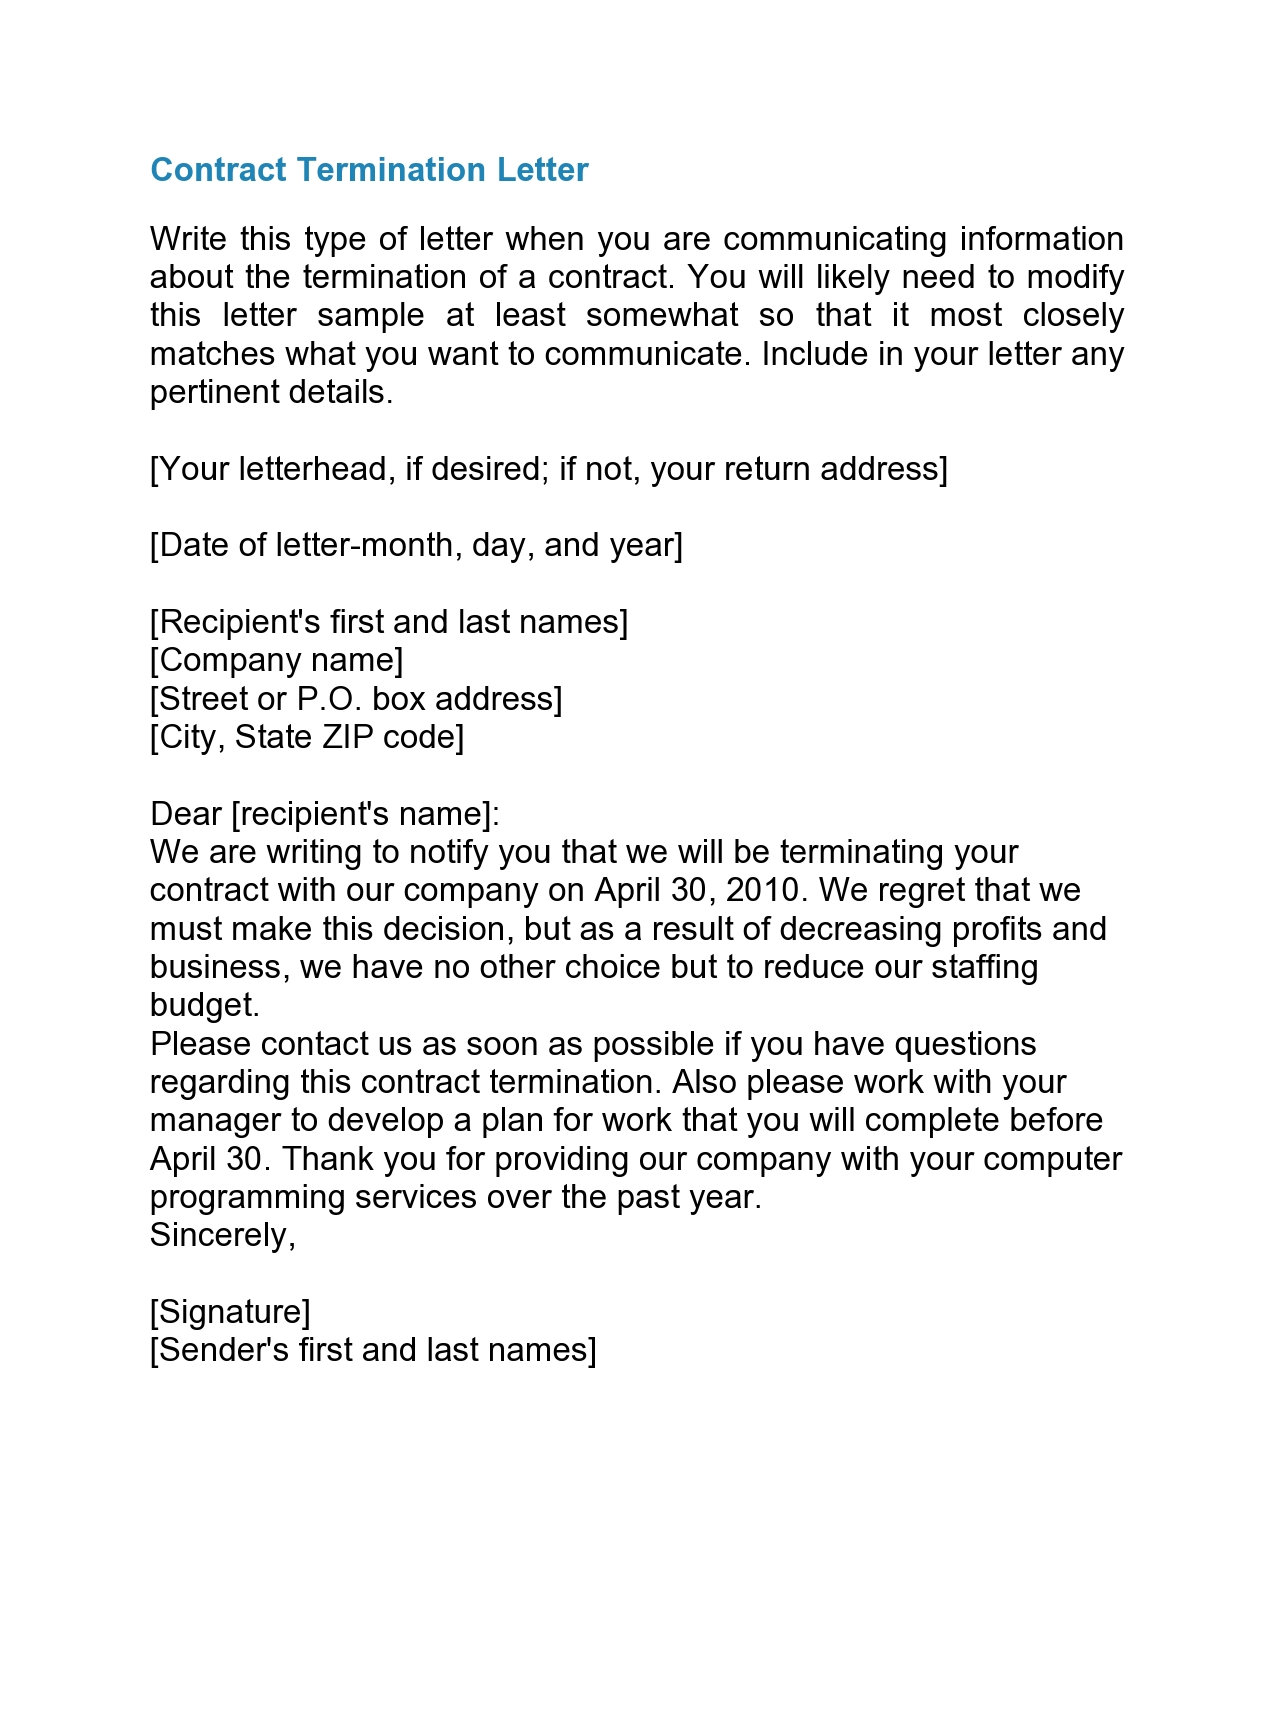 Free contract termination letter 43